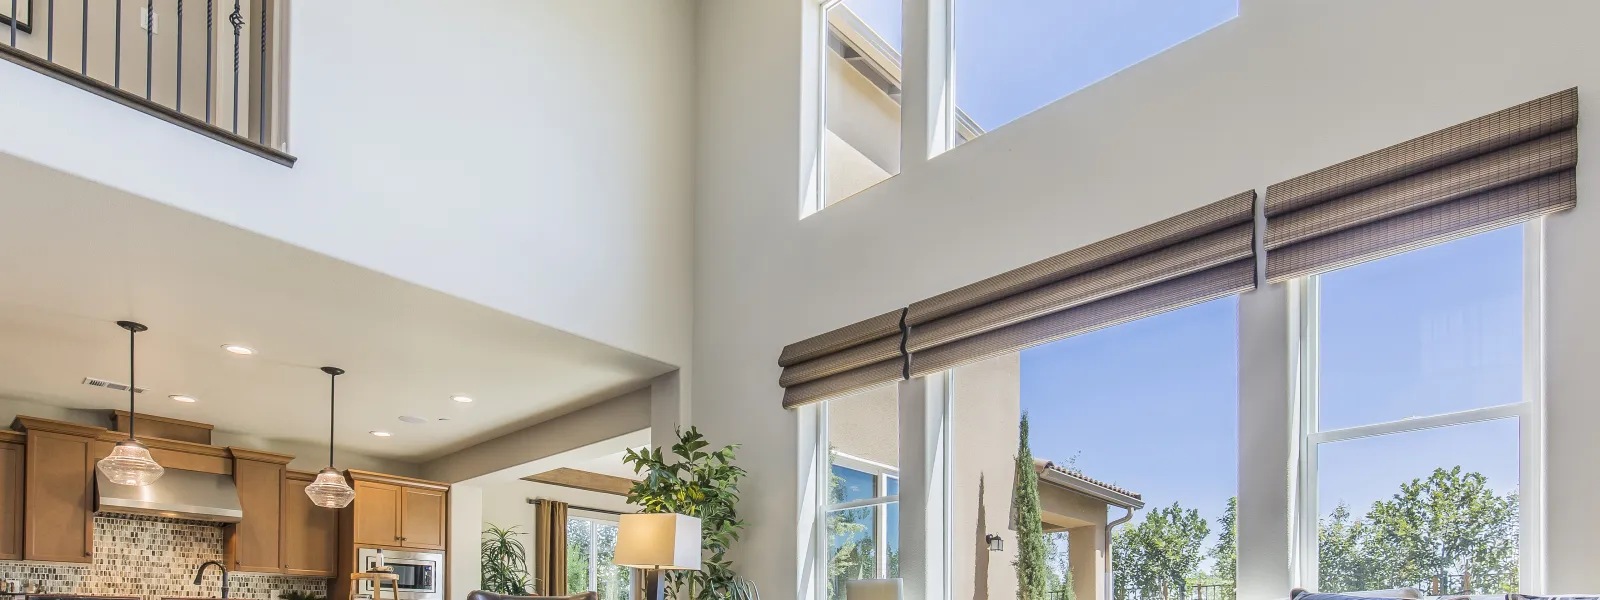 The Truth About Energy-Efficient Windows